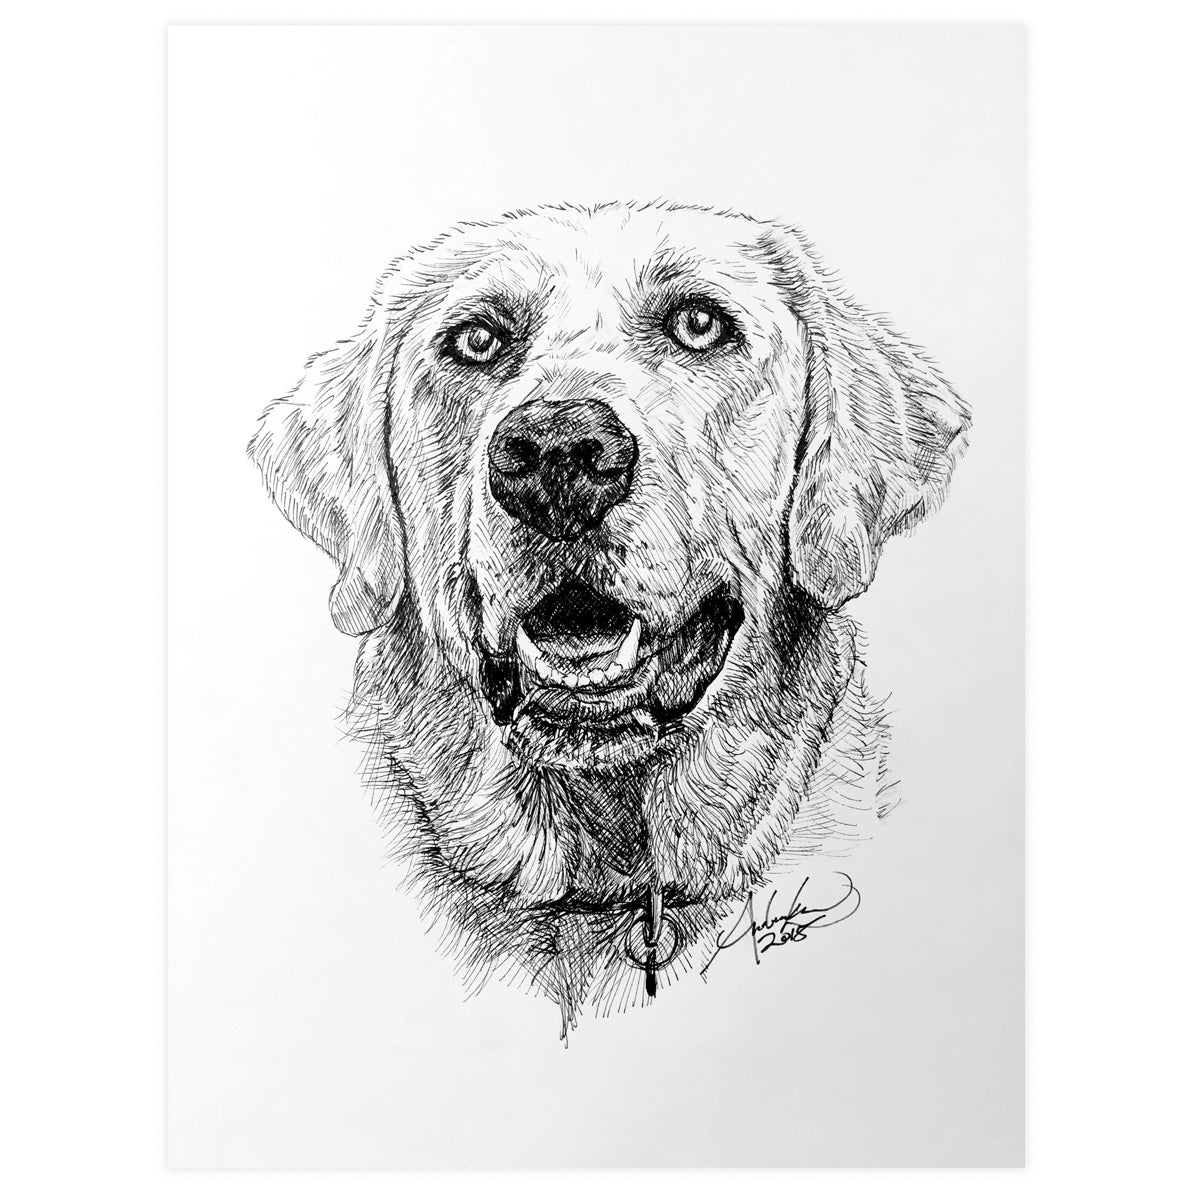 Graphite pet portrait drawings by Kathrin Guenther